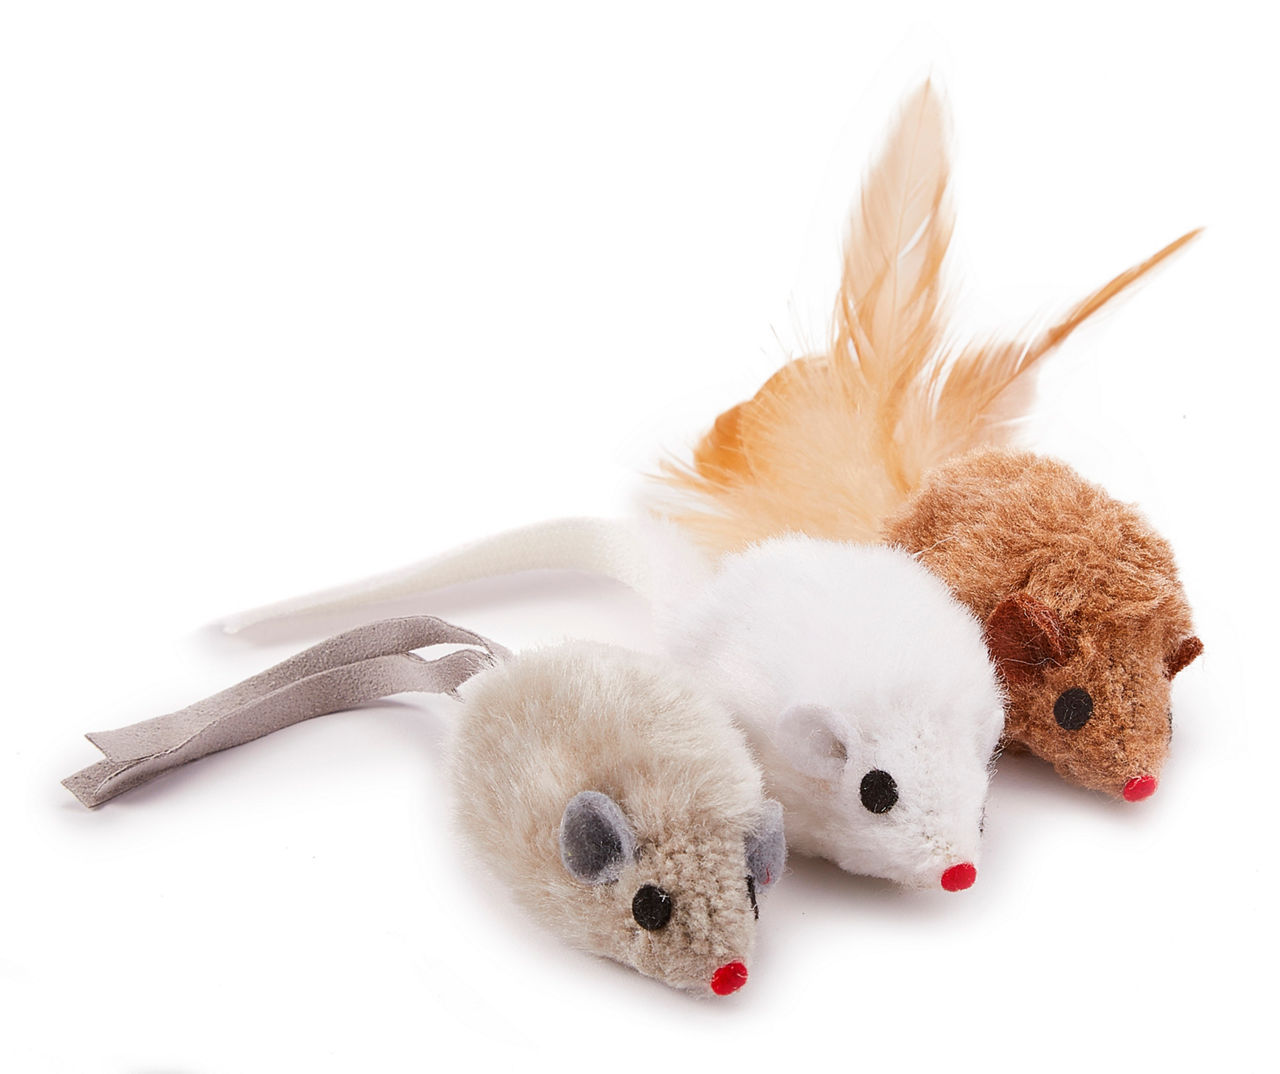 Catch The Mouse Toy, Cat Toys, Buy Online at Best Price